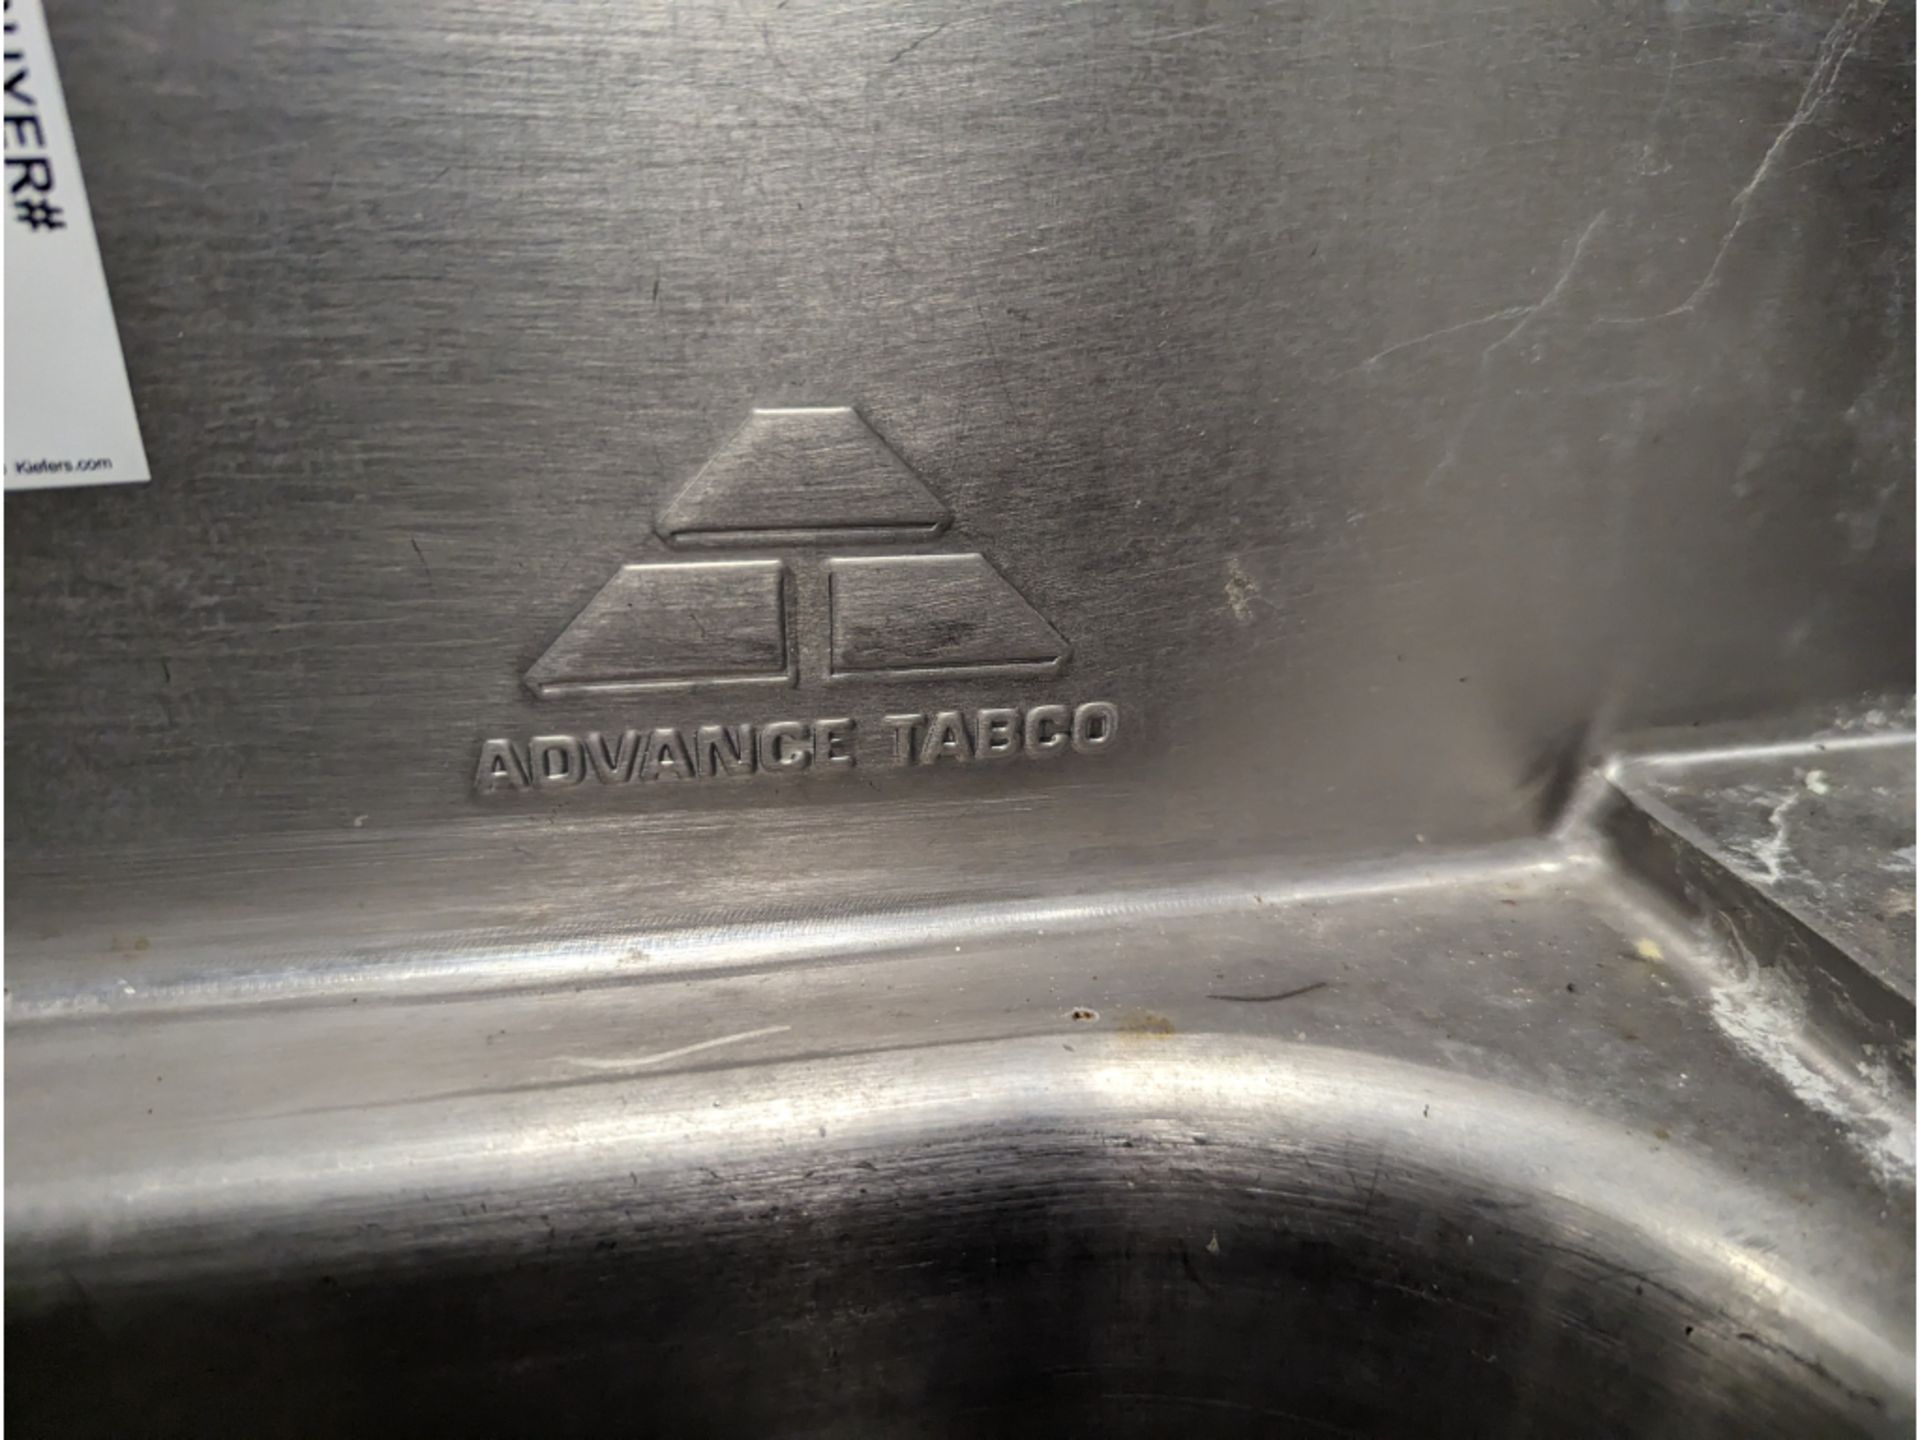 Advance Tabco 4 Bay Stainless Sink - Image 4 of 4